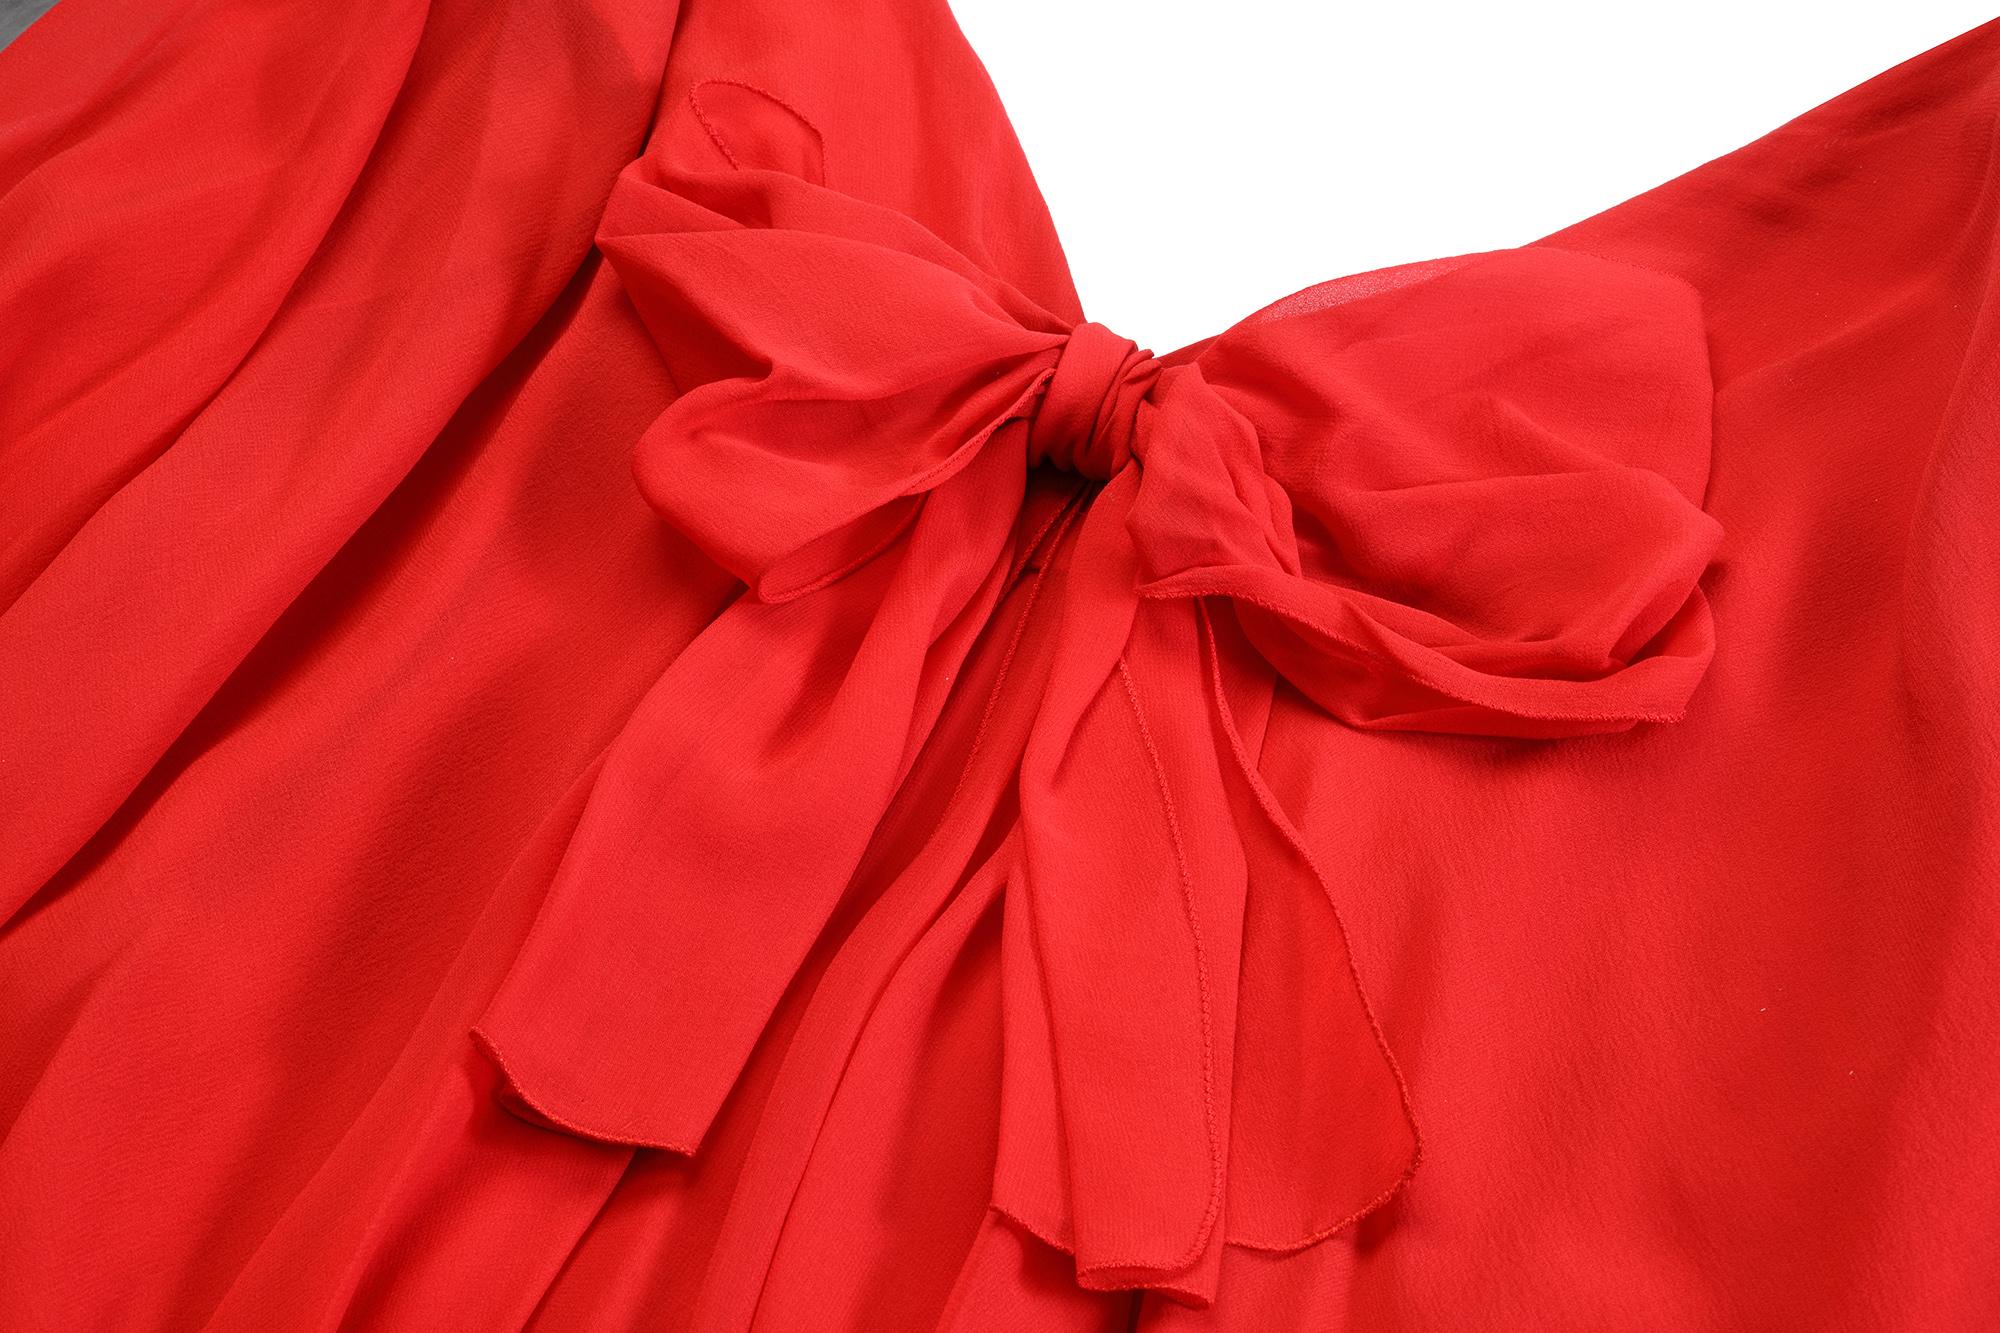 1970s Christian Dior Demi Couture Red Silk Chiffon Dress For Sale 3